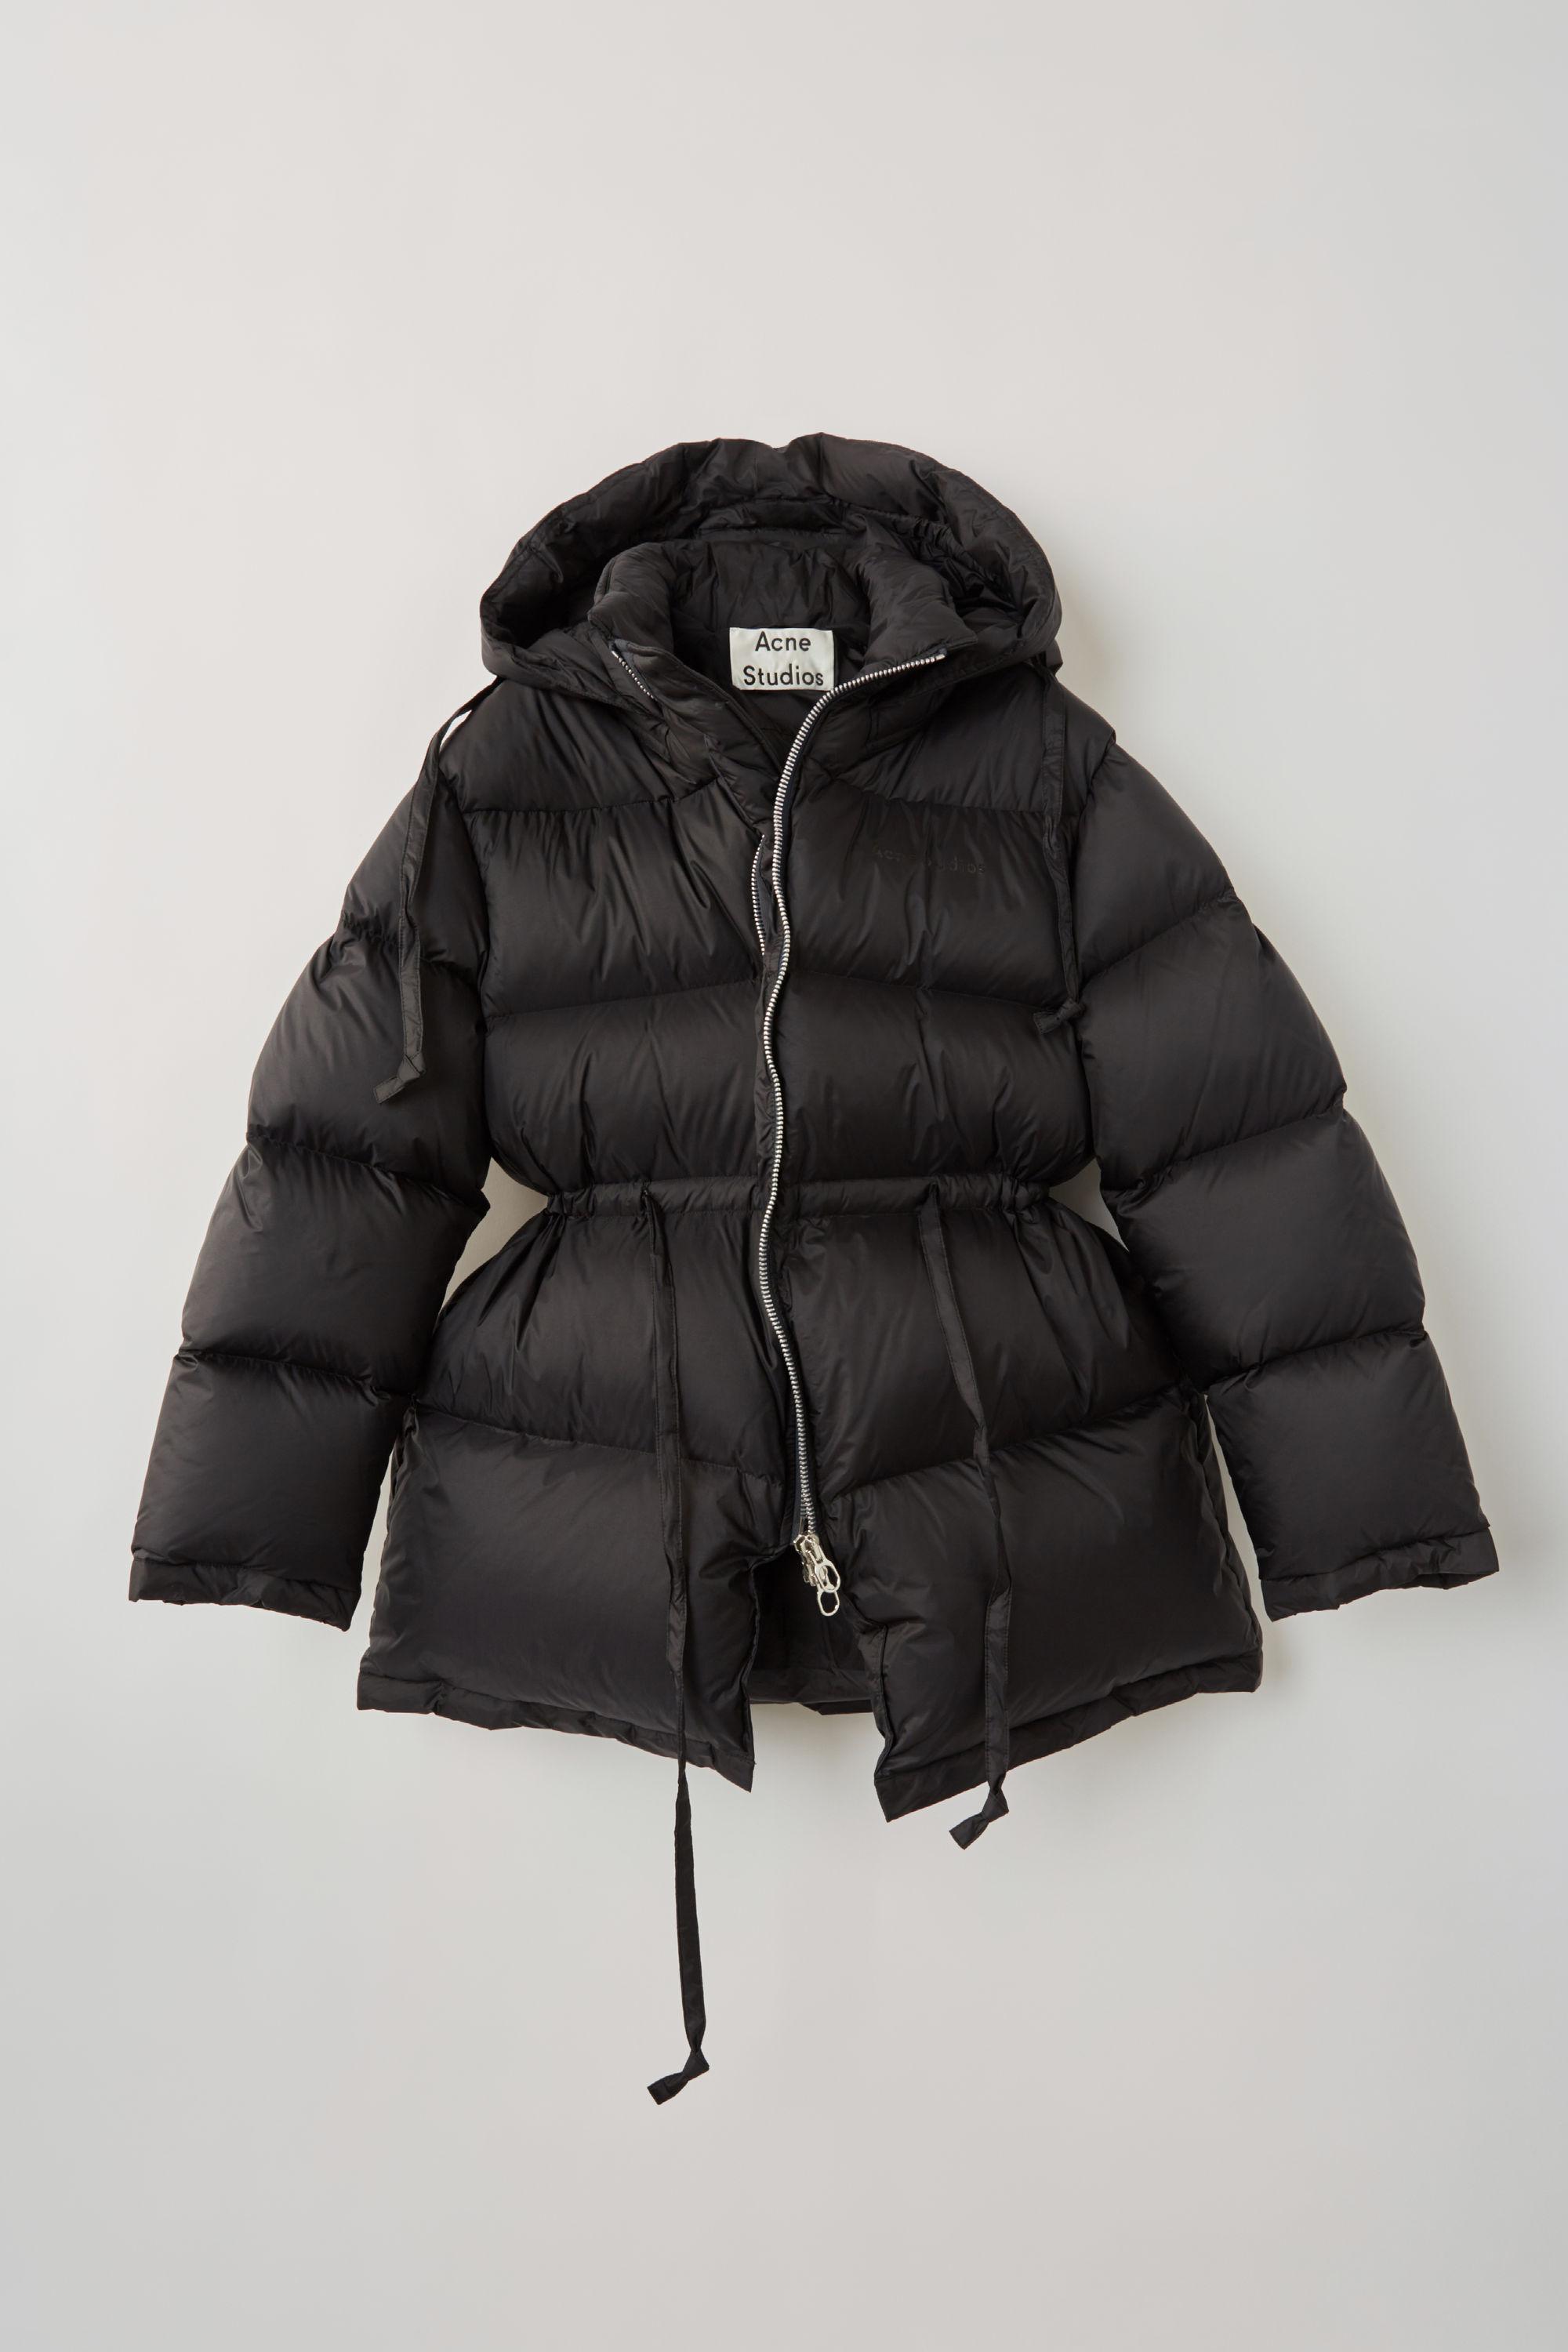 Acne Studios Synthetic Fn-wn-outw000017 Black Hooded Down Jacket - Lyst